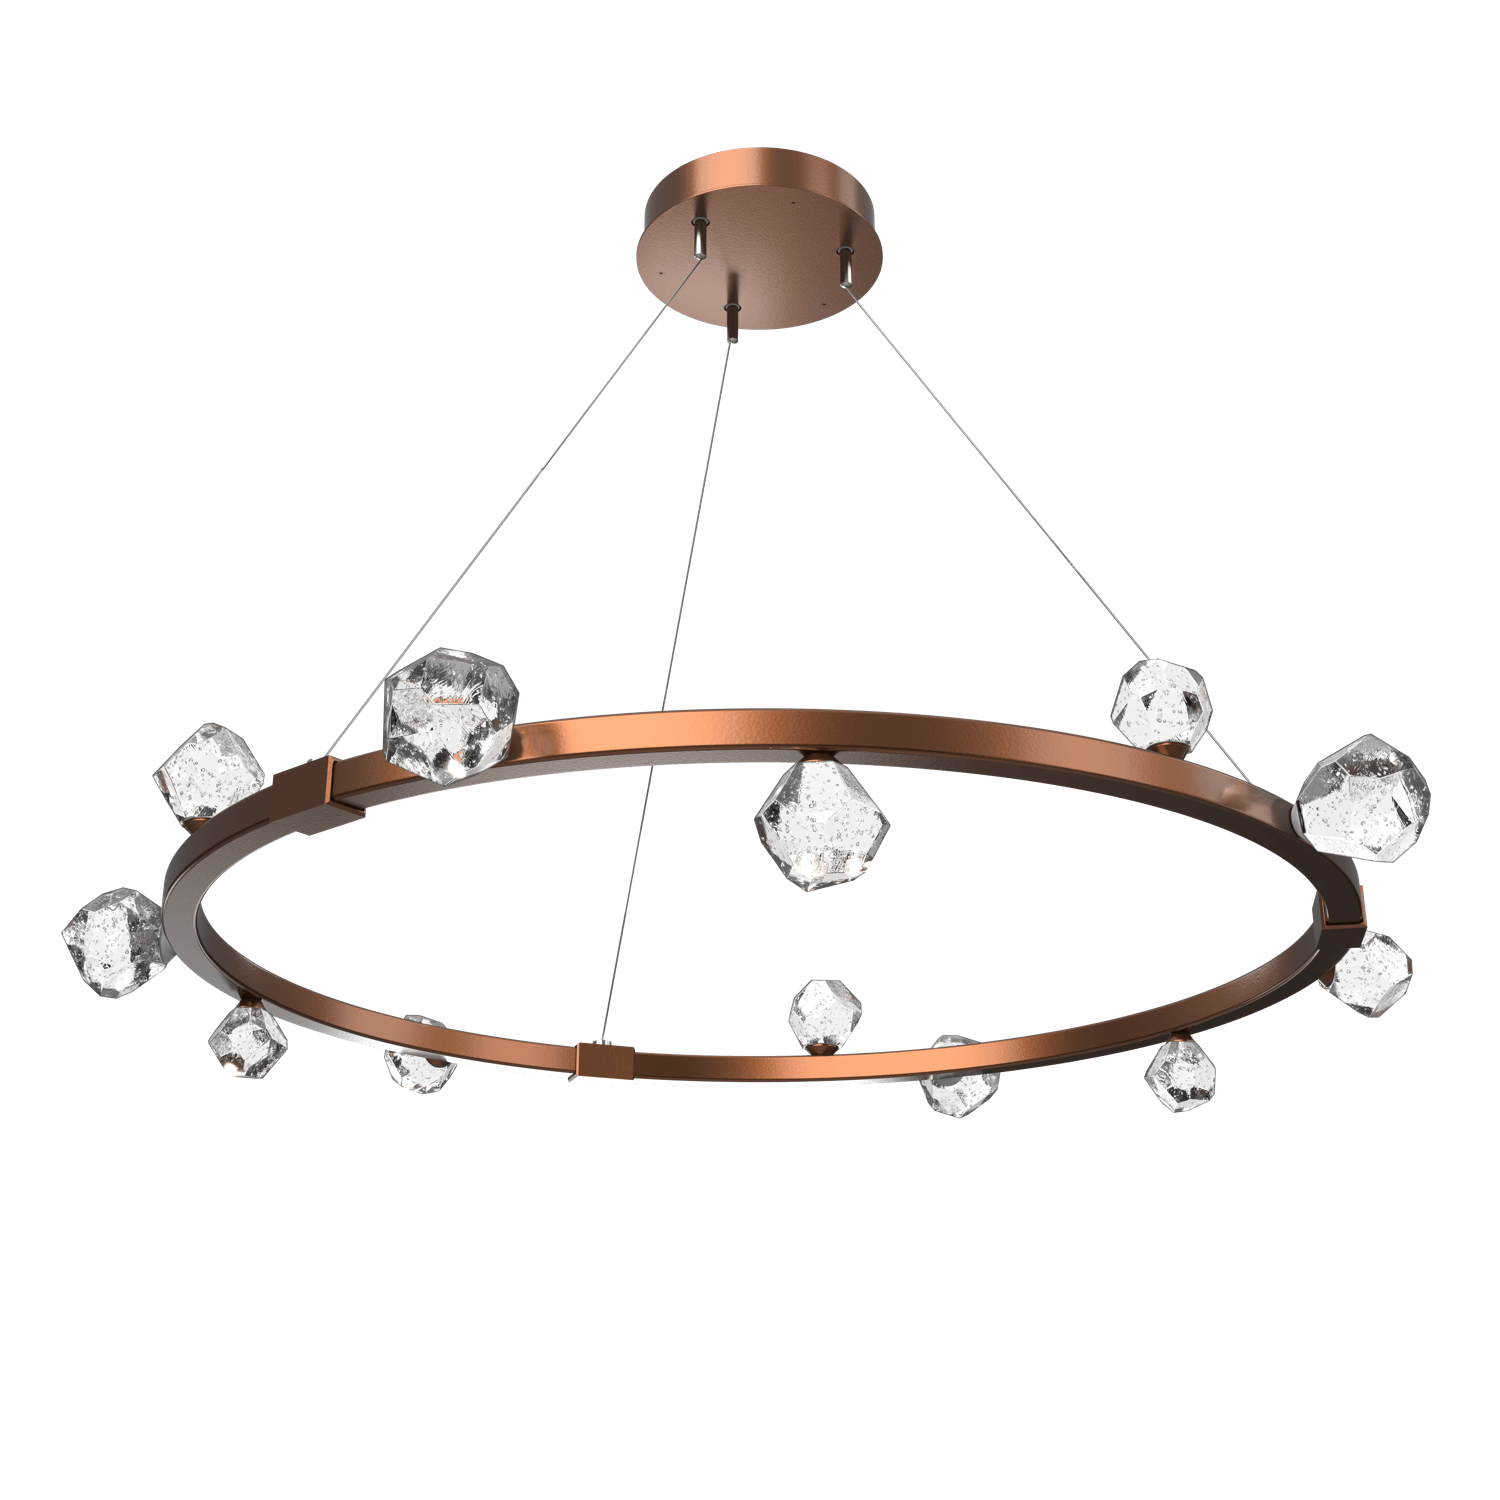 CHB0070-40-BB-Hammerton-Studio-Stella-40-inch-radial-ring-chandelier-with-burnished-bronze-finish-and-clear-cast-glass-shades-and-LED-lamping